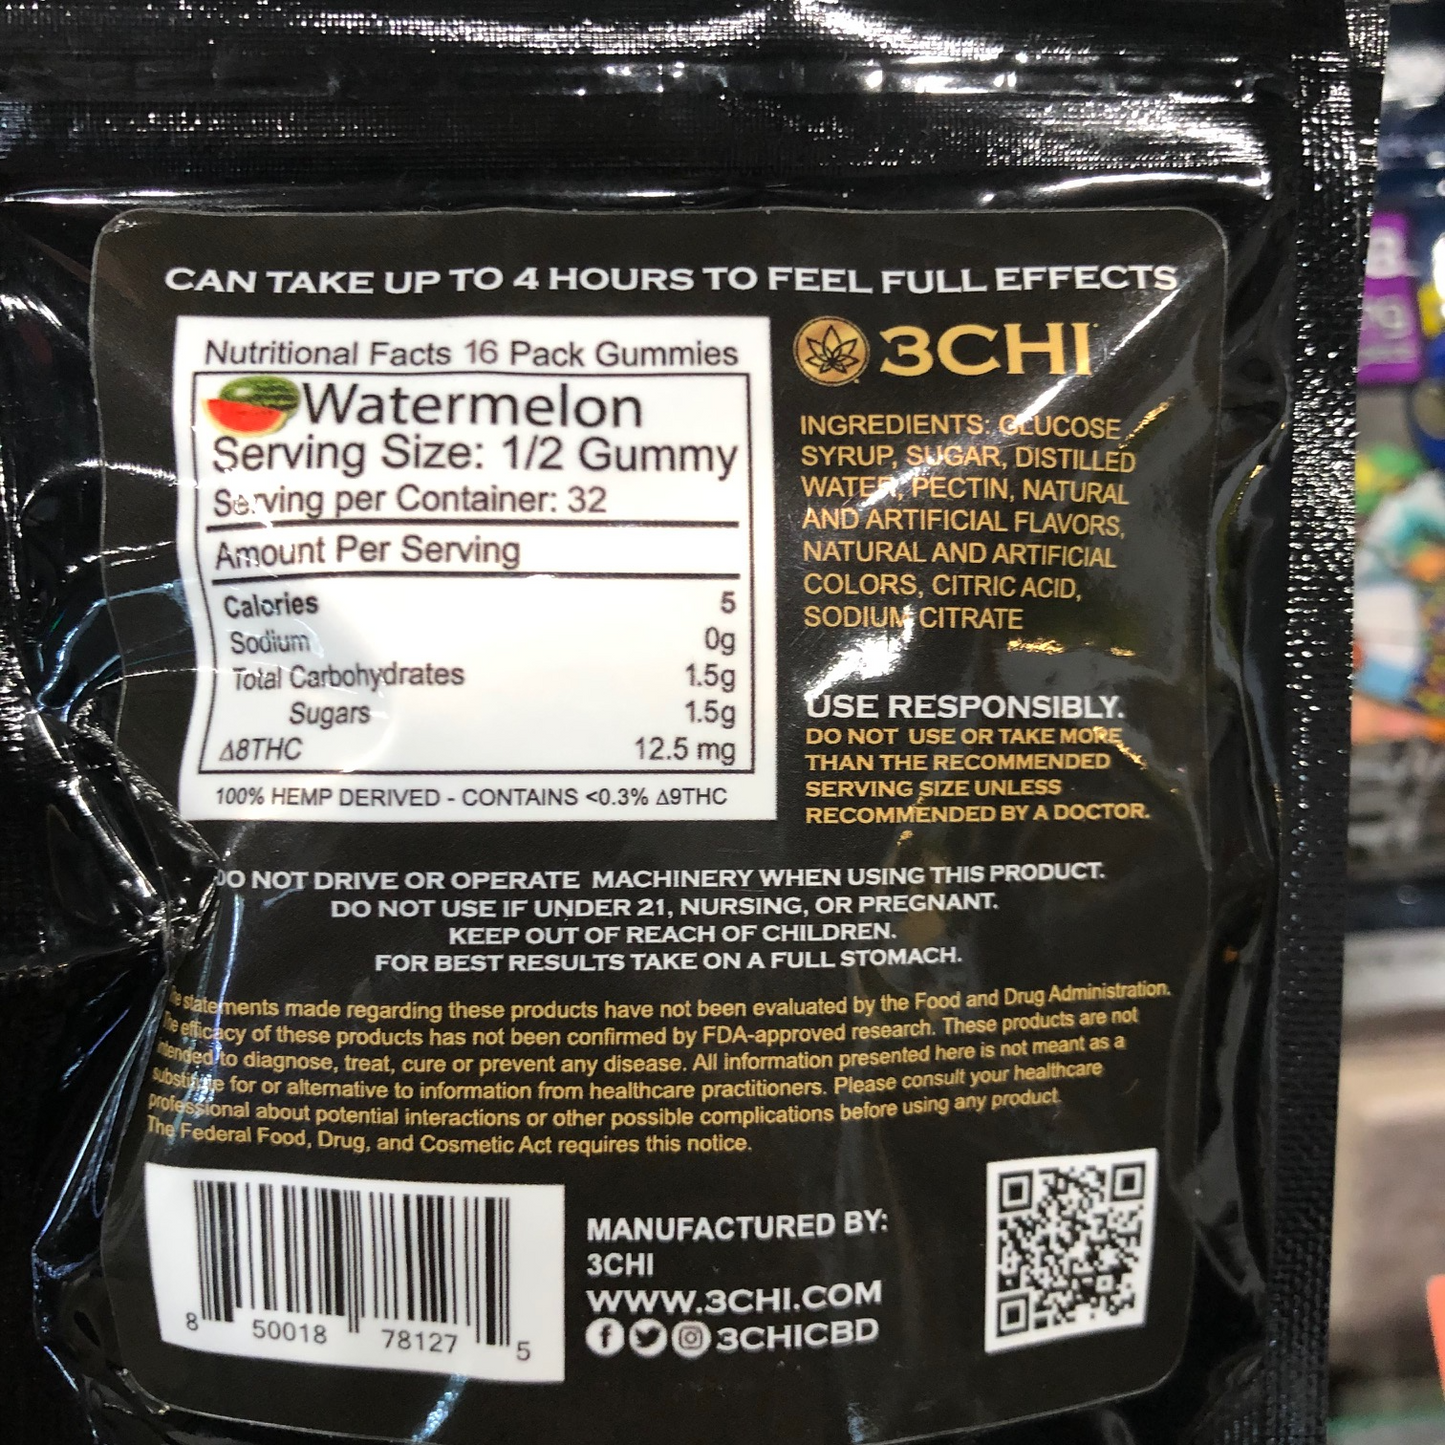 3chi thc delta 8 edibles 25mg 16ct watermelon flavor nutritional facts